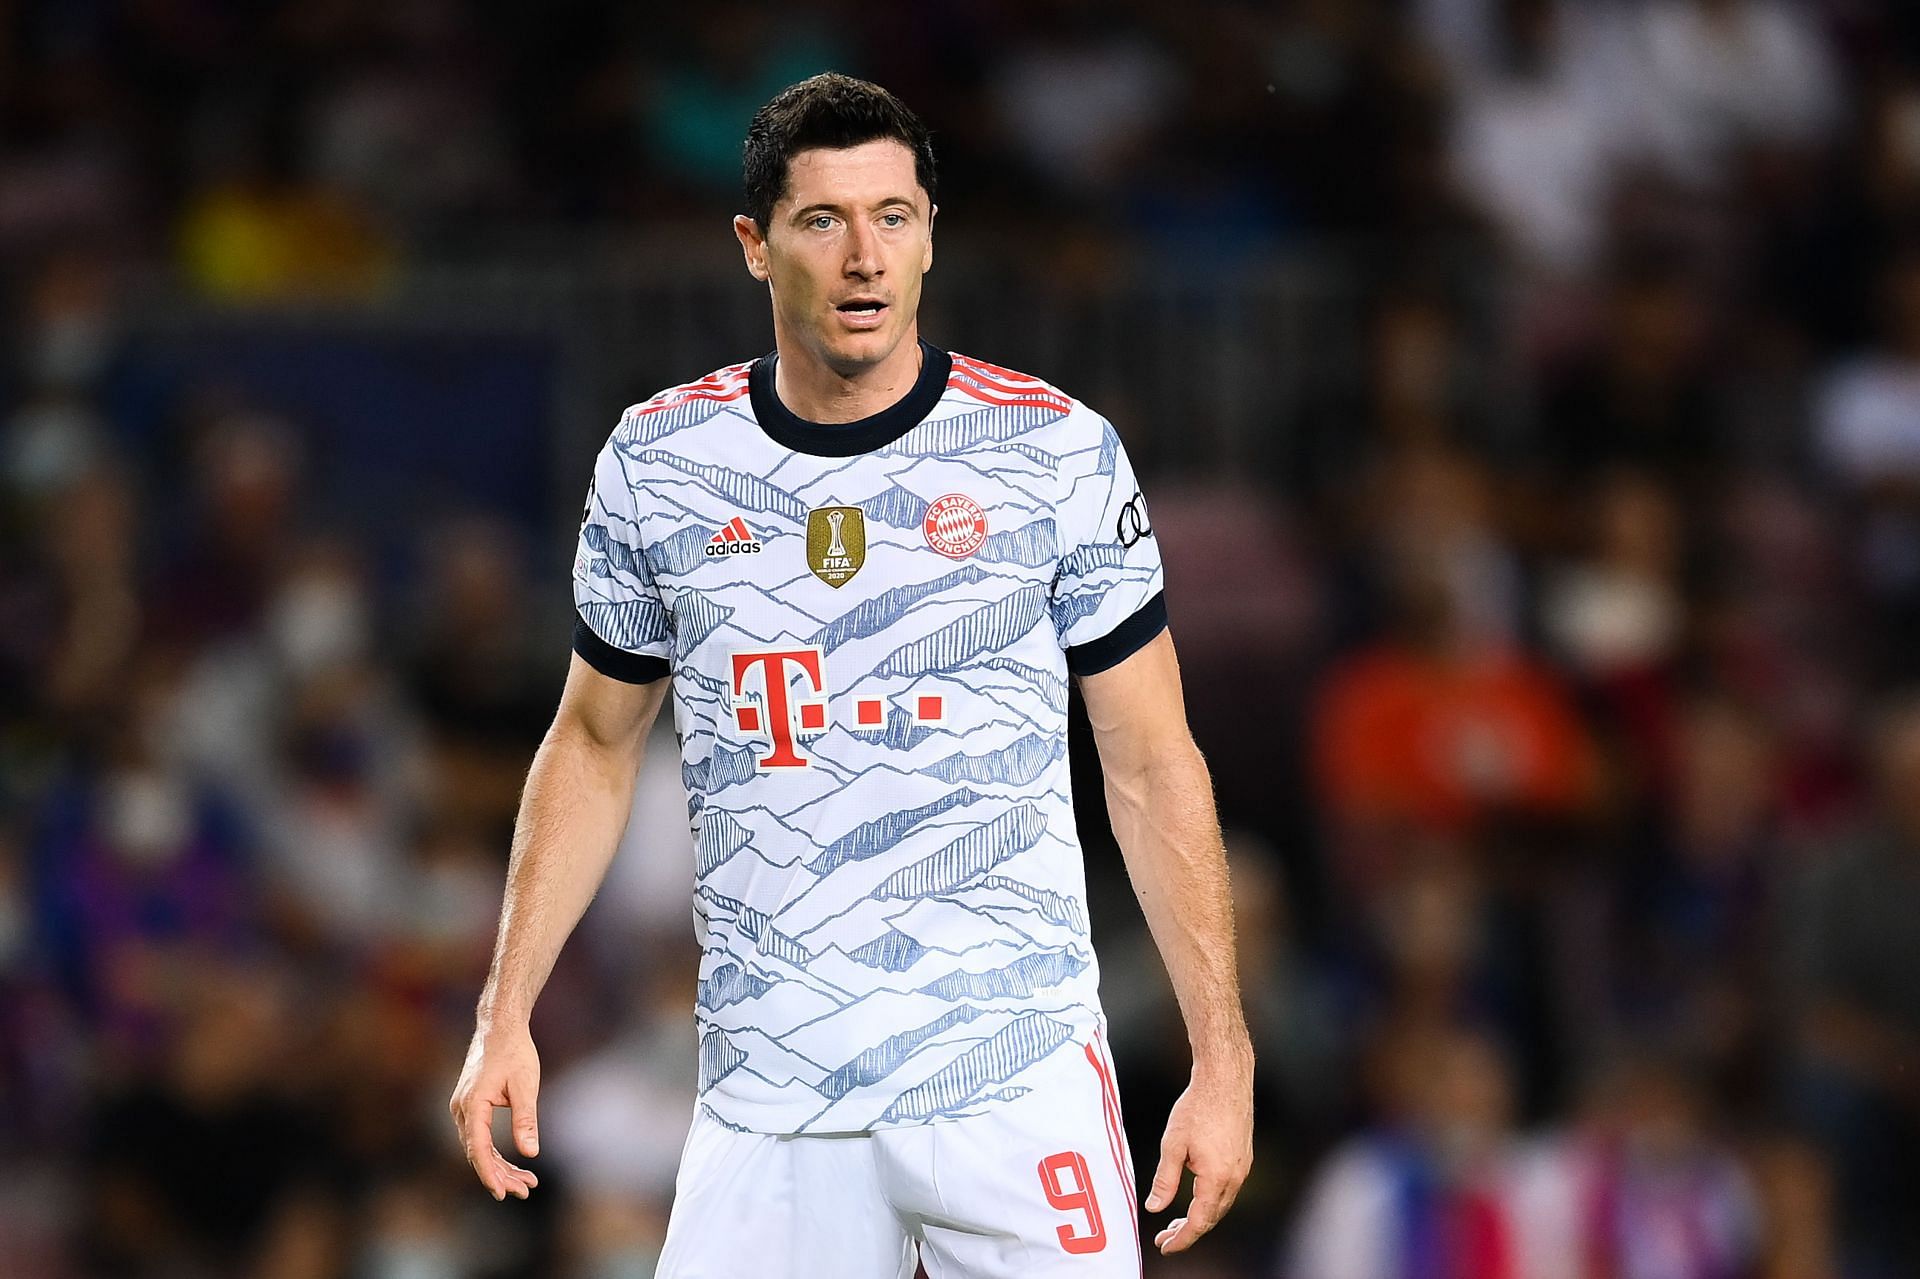 Robert Lewandowski in action for Bayern Munich during their Champions League group game against Barcelona